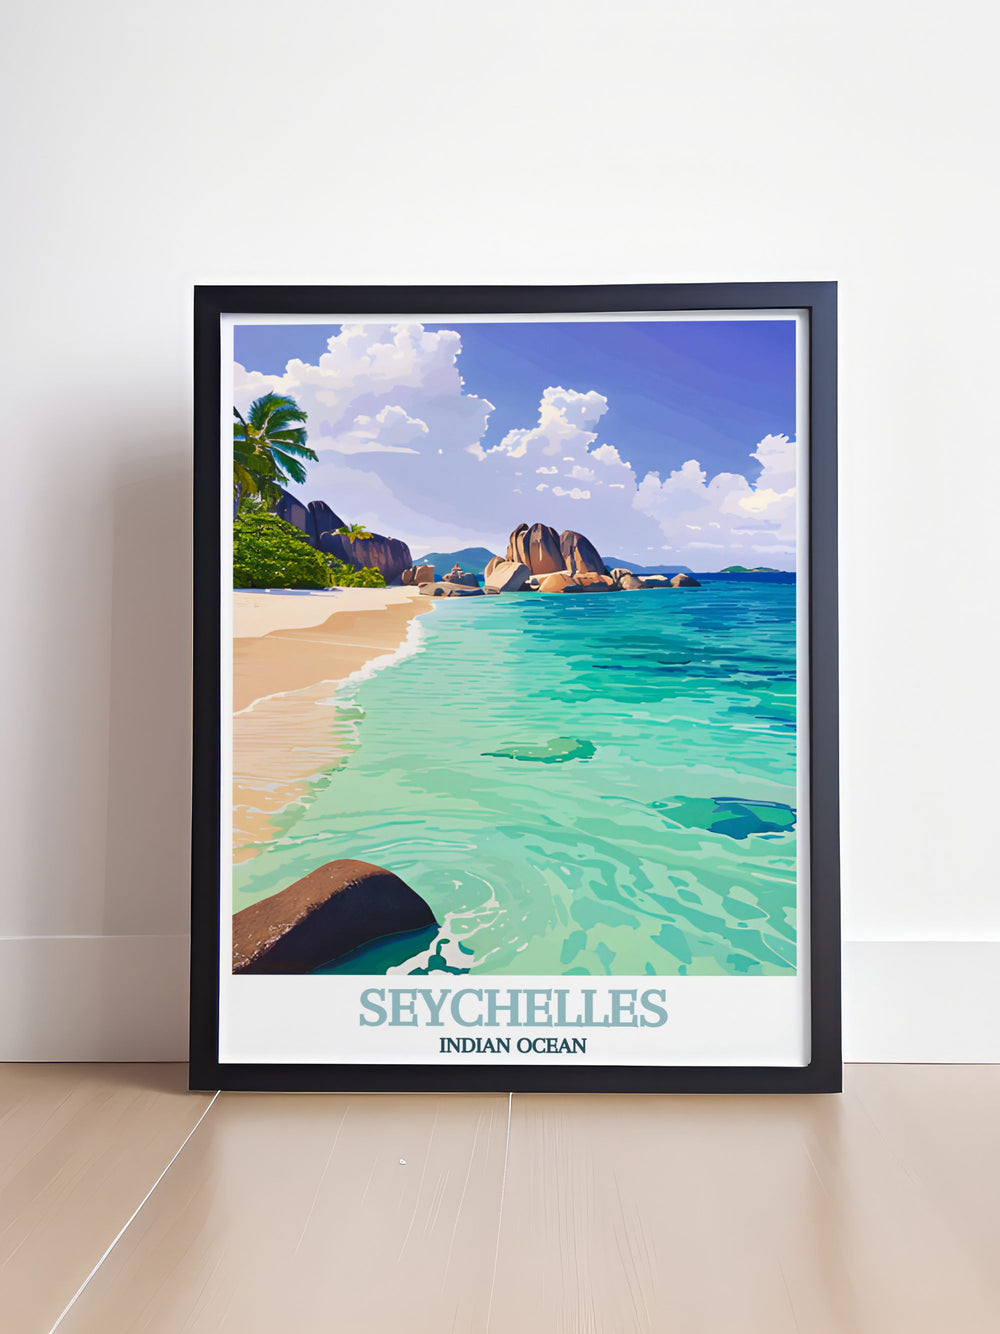 Featuring the vibrant scenery of Anse Source dArgent in Seychelles, this travel poster is perfect for those who love exploring tropical destinations and appreciating the beauty of nature.